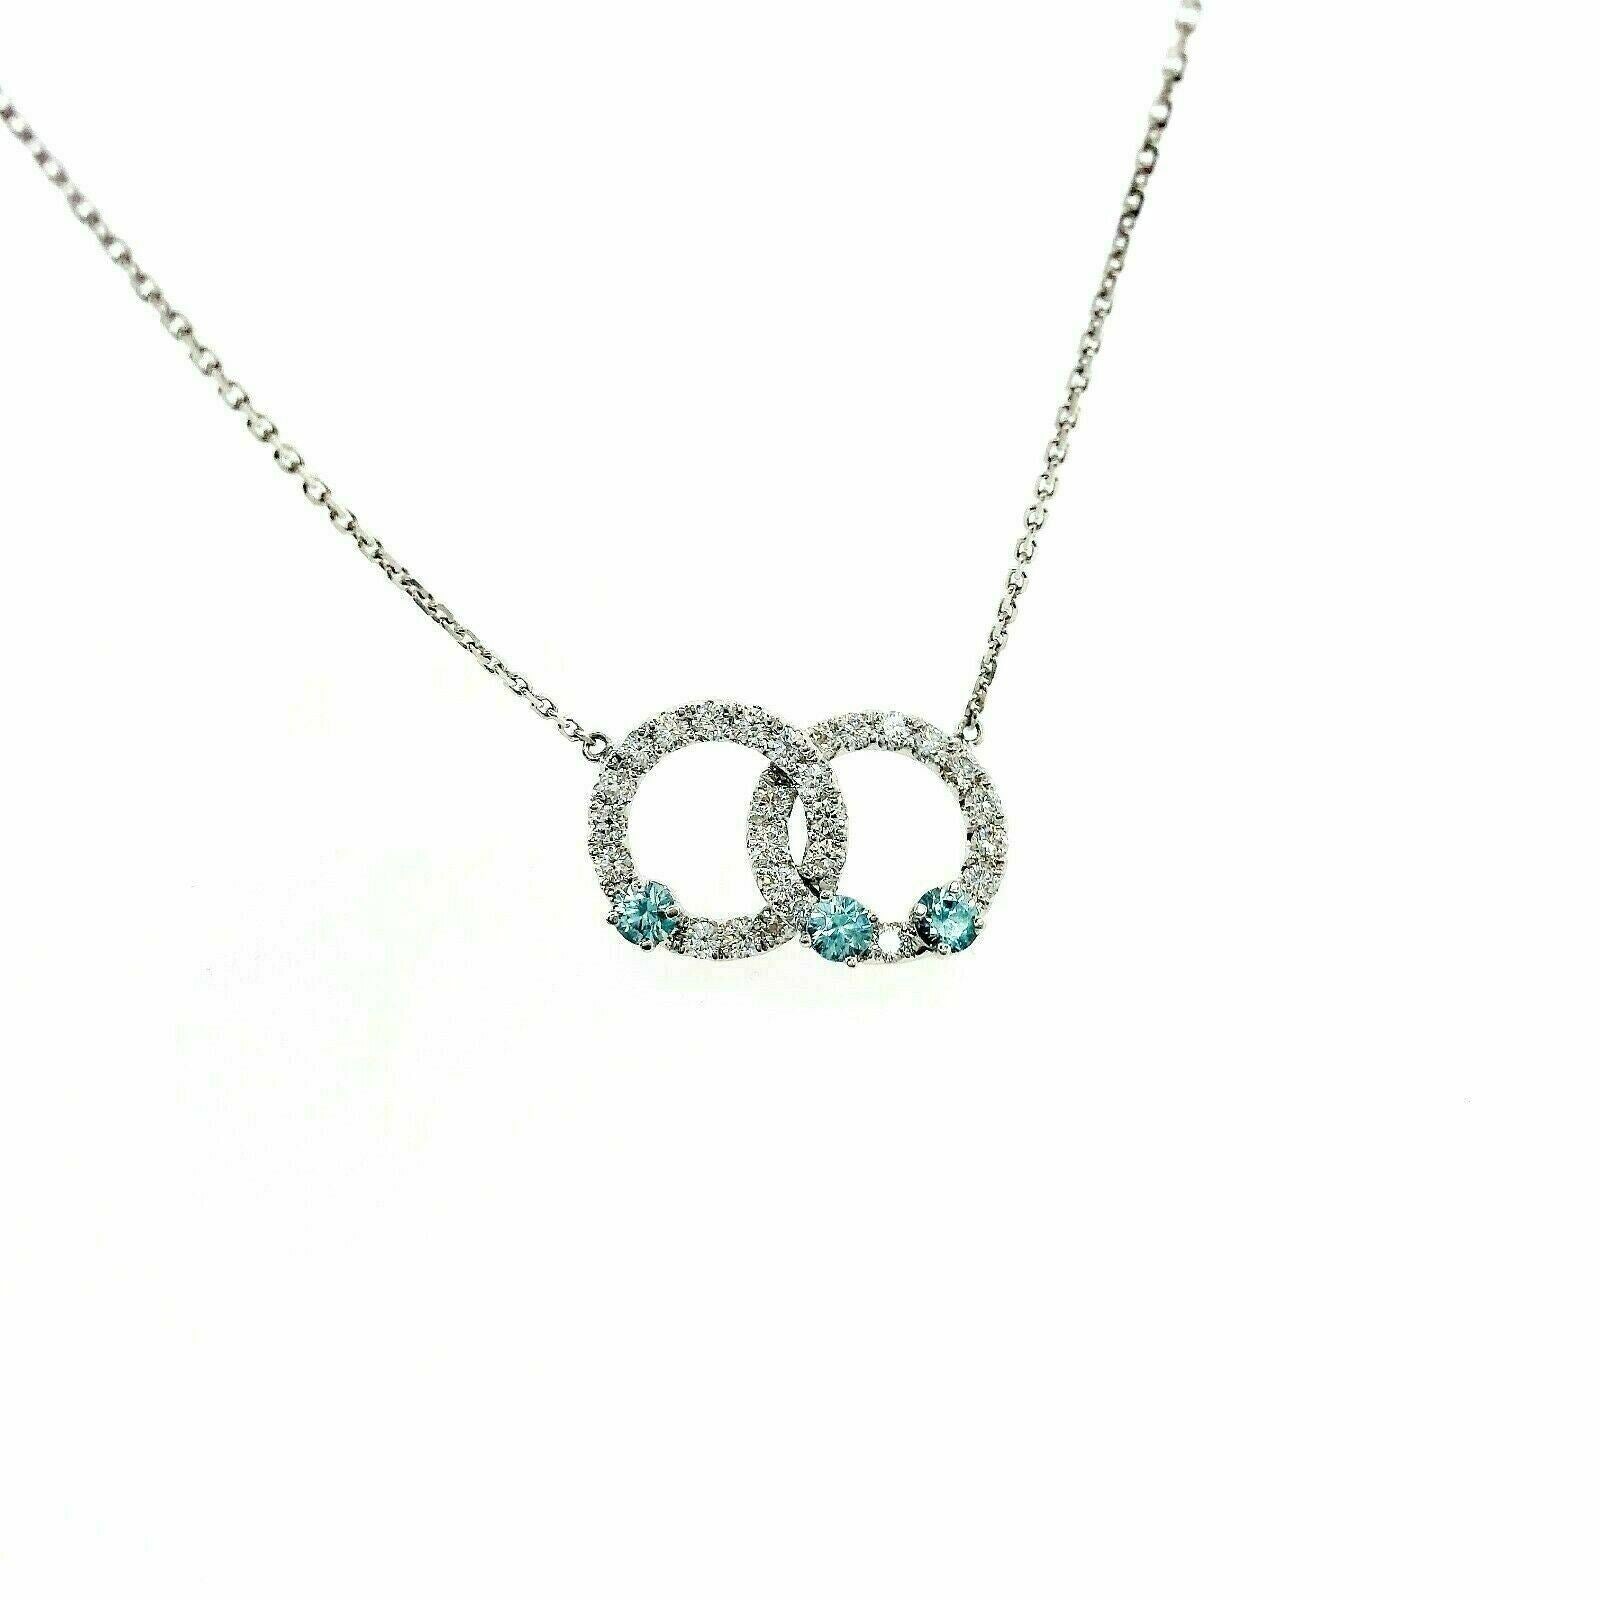 2.15 Carats t.w. Diamond and Blue Topaz 14K Gold Intertwined Circles Necklace